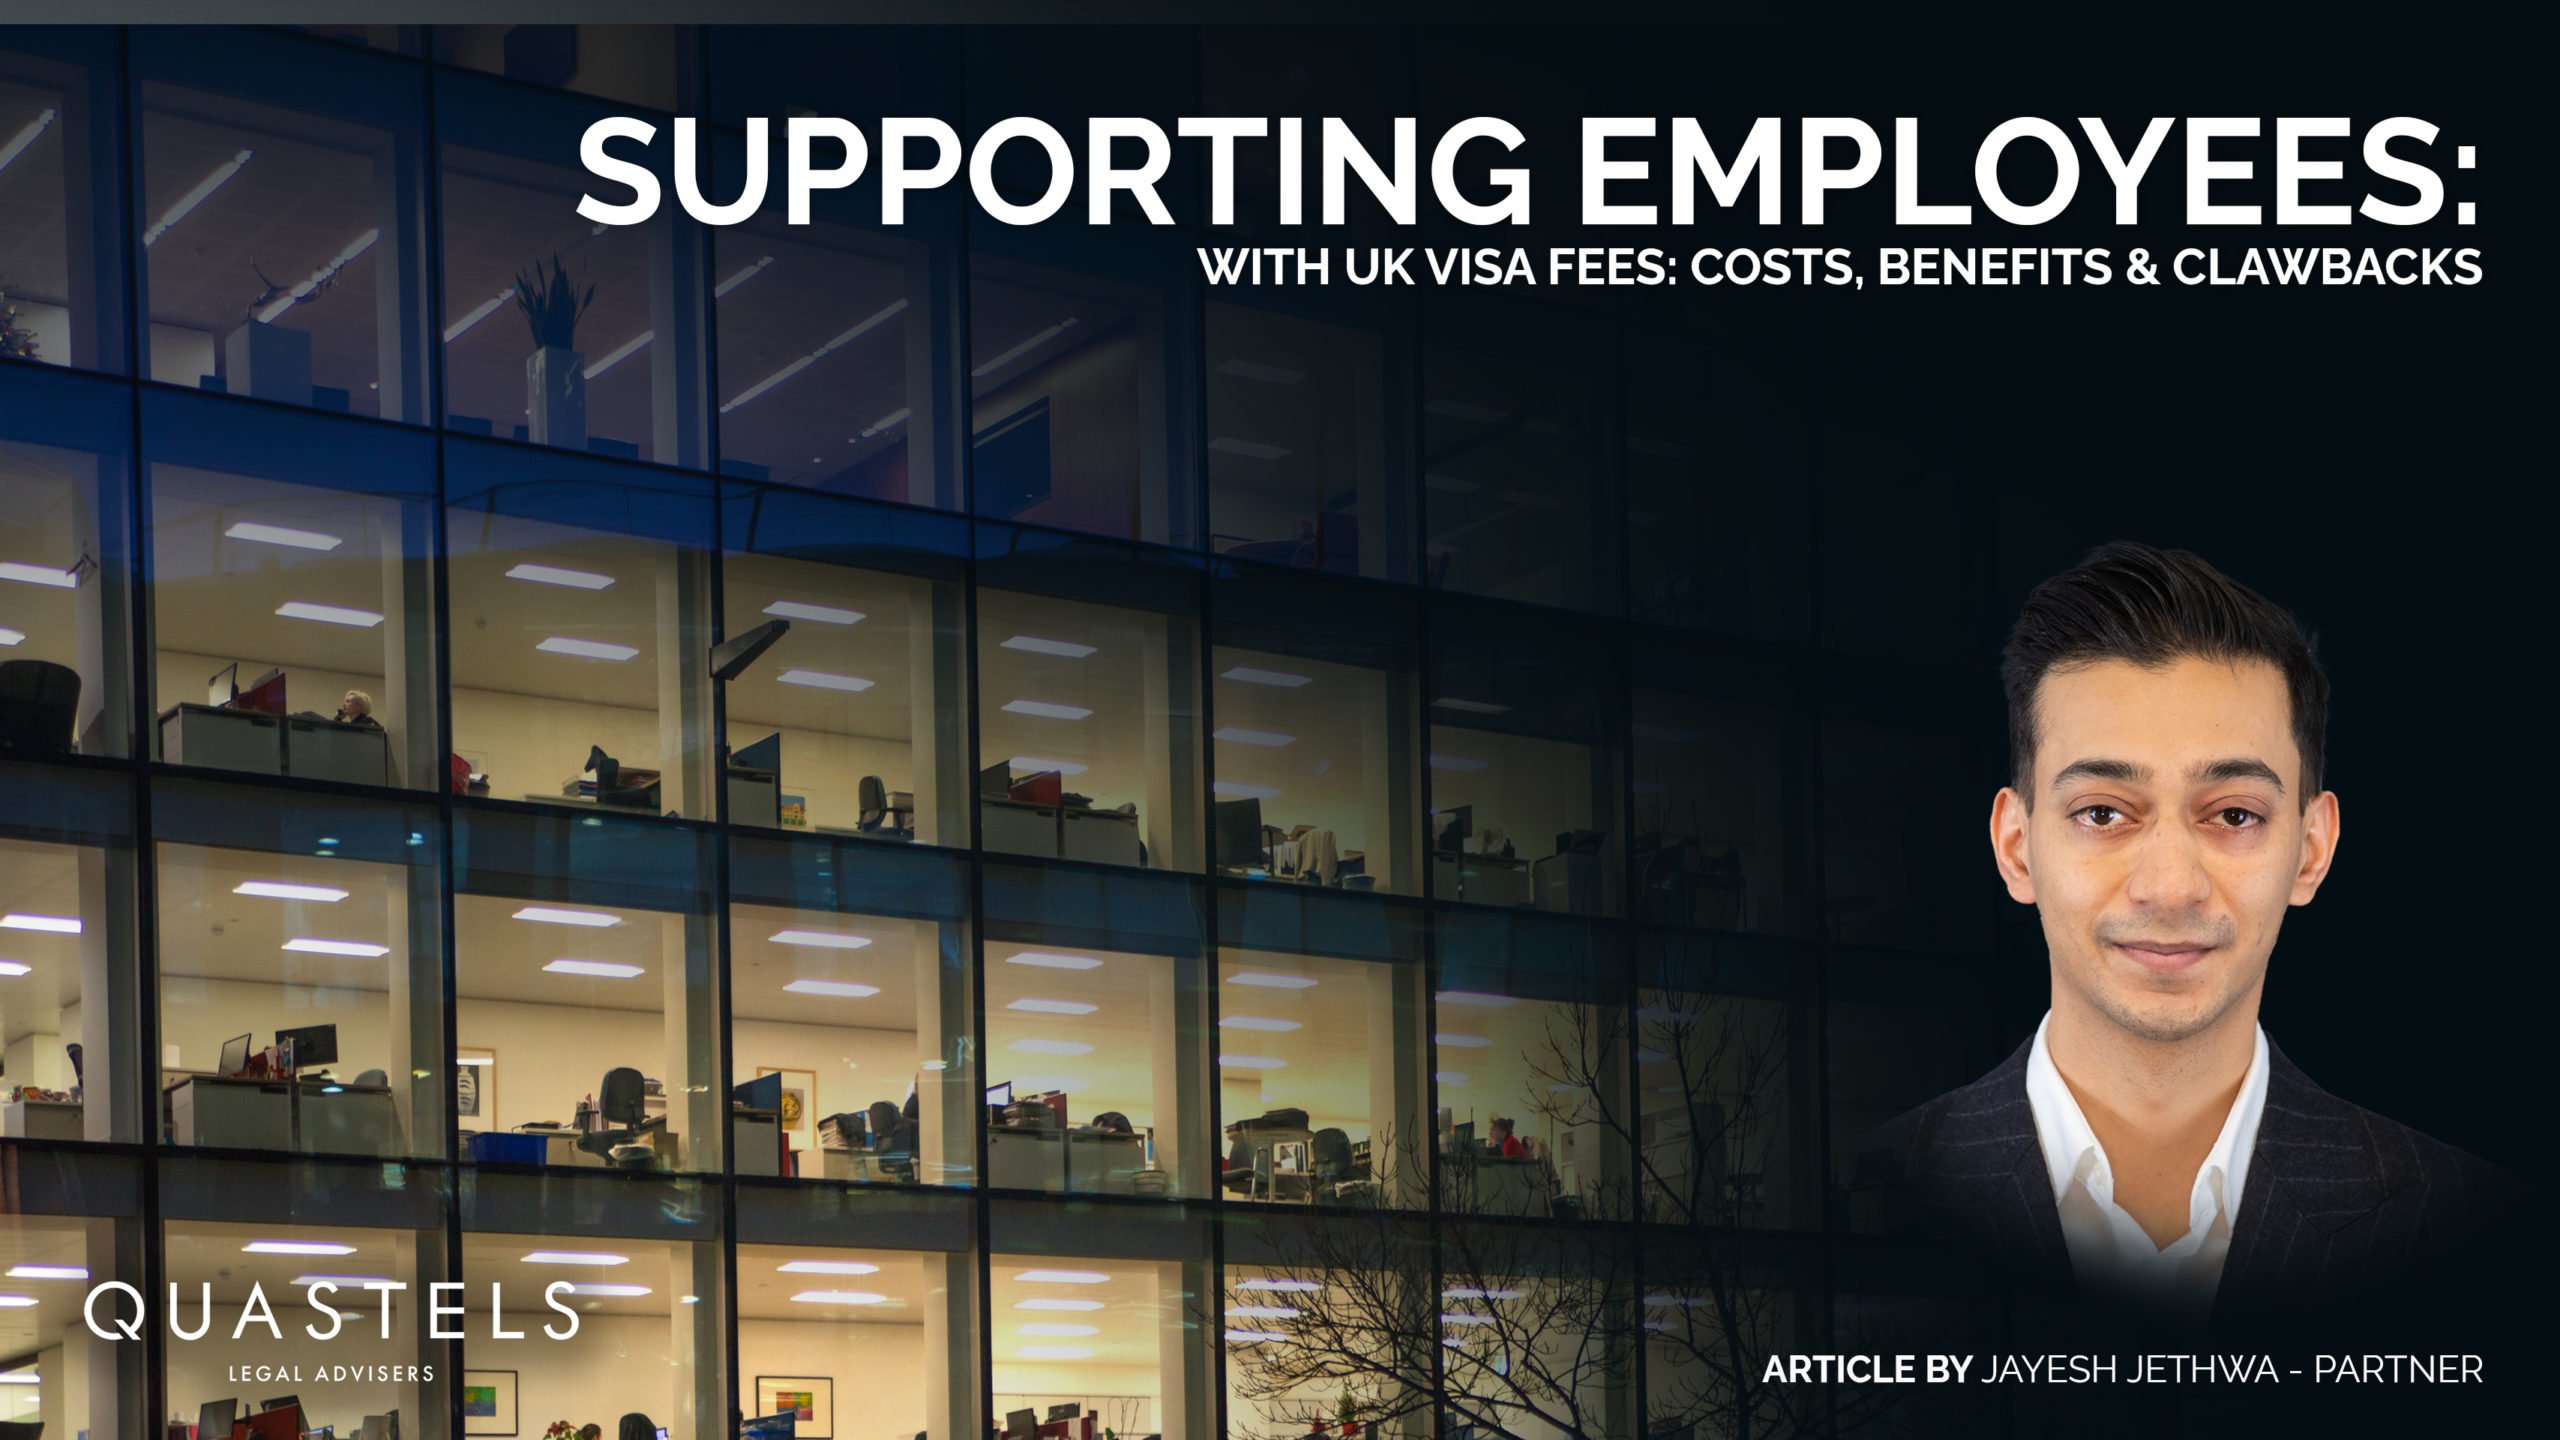 Supporting Employees with UK Visa Fees: Costs, Benefits & Clawbacks